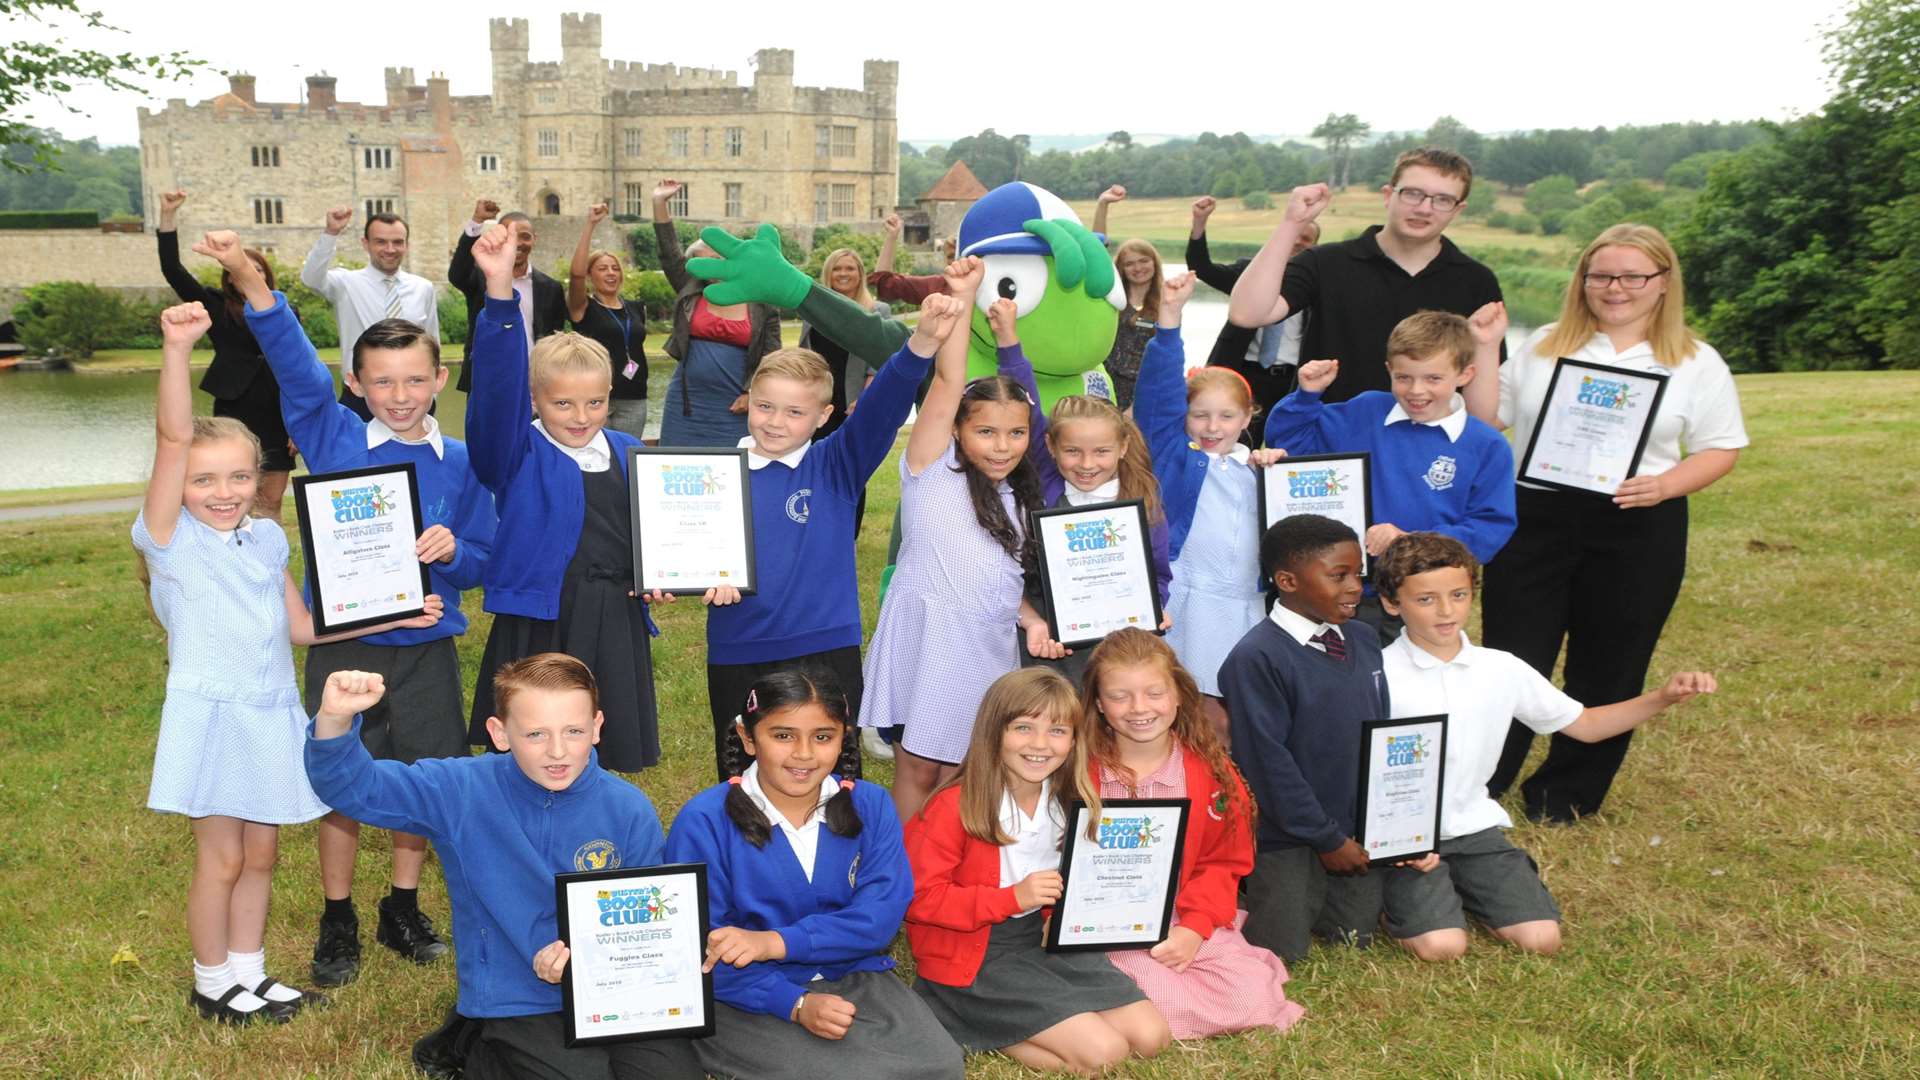 The top classes for reading were rewarded with certificates and tickets to Leeds Castle.